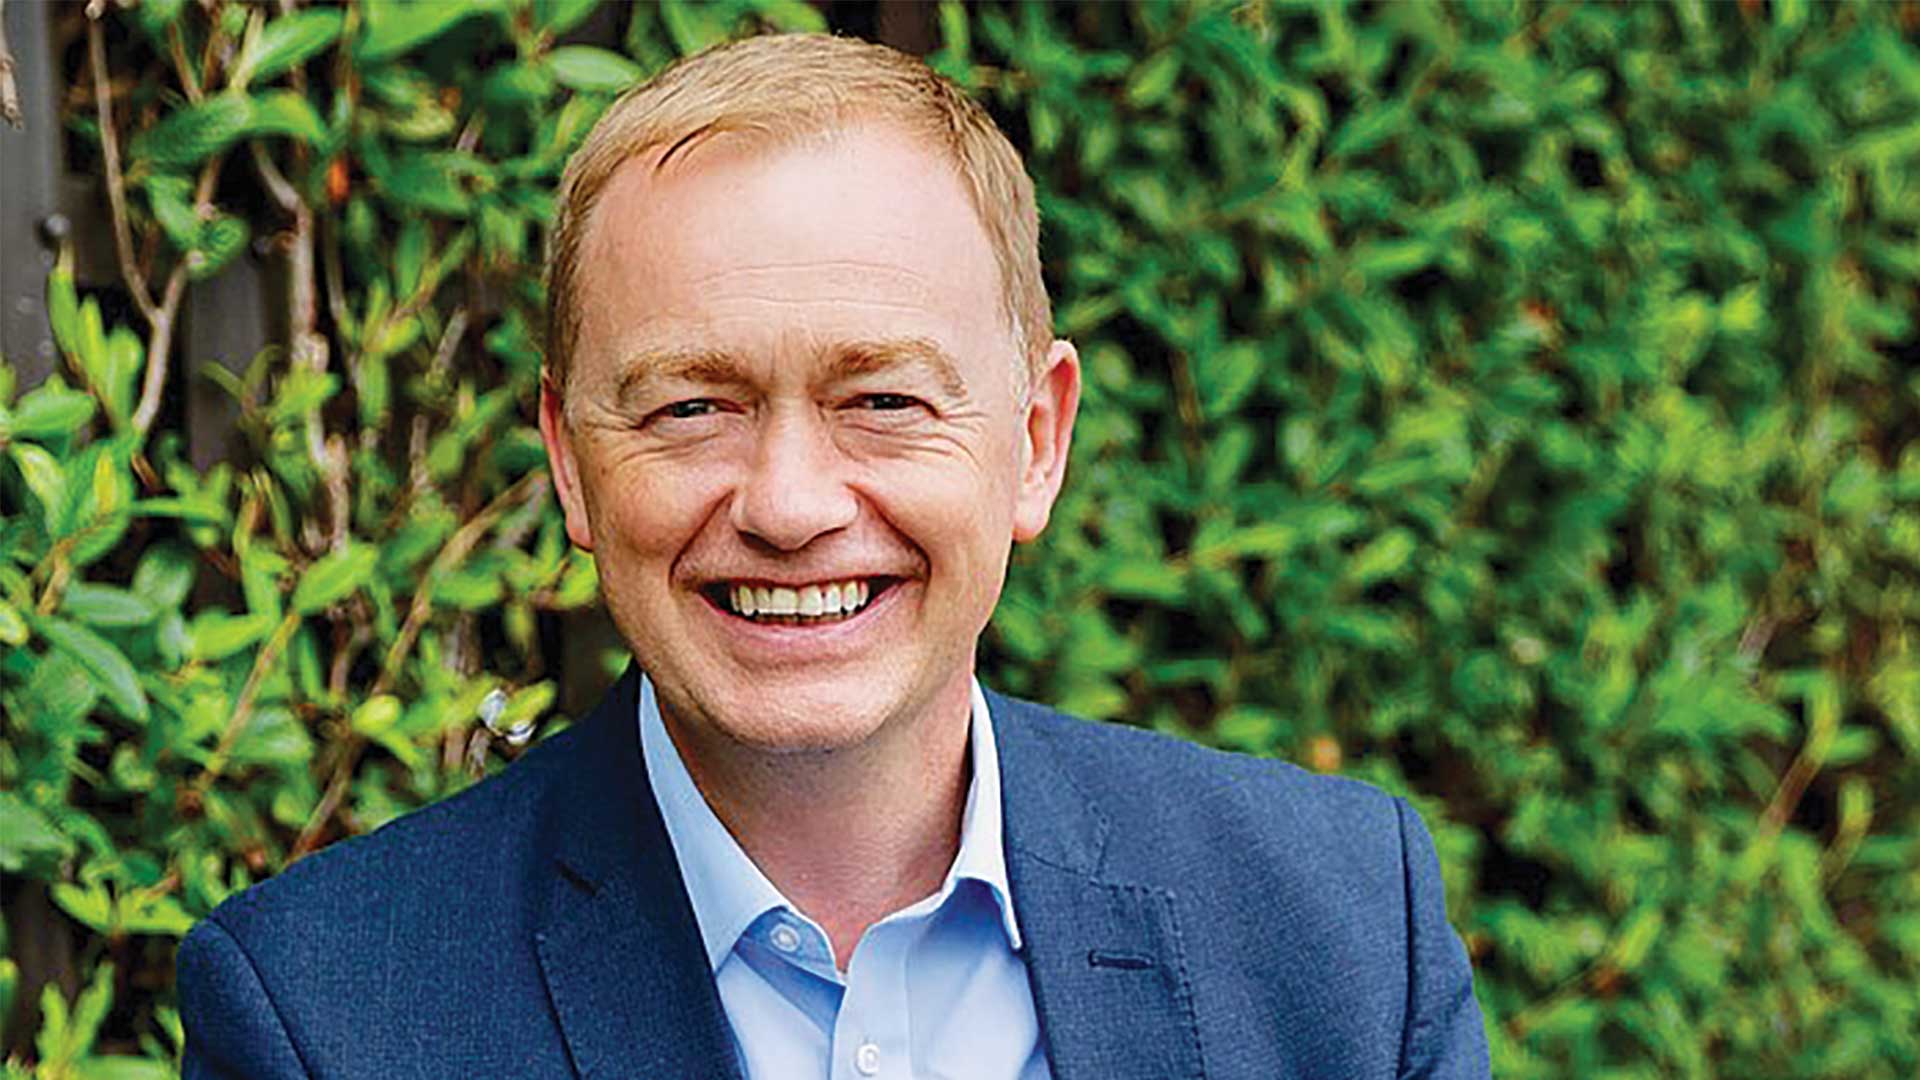 Tim Farron served as Leader of the Liberal Democrats from 2015 to 2017. He was elected Member of Parliament for Westmorland and Lonsdale in 2005 and is the Liberal Democrat Spokesperson for Environment, Food and Rural Affairs. He is a candidate in the 2024 General Election and the author of A Mucky Business, published by IVP.